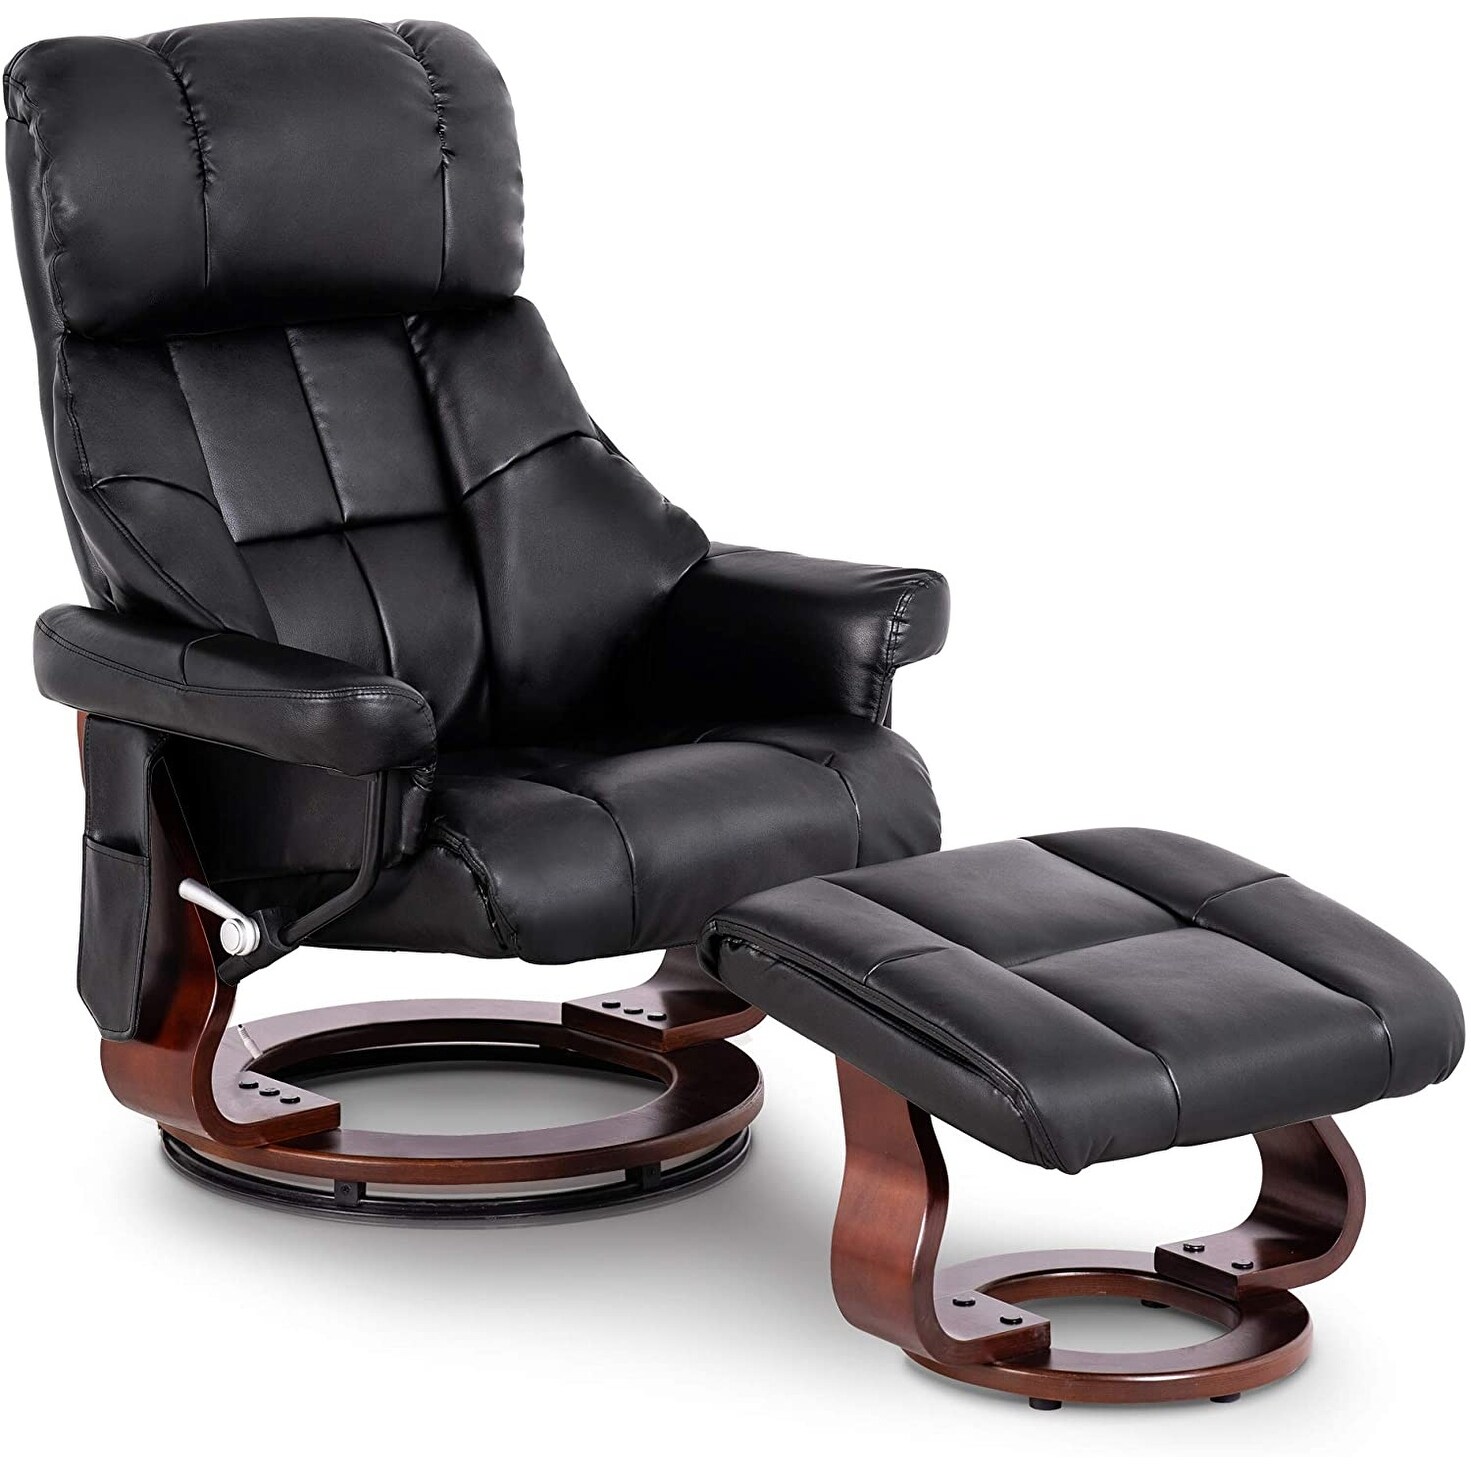 https://ak1.ostkcdn.com/images/products/is/images/direct/e0d8e86366dfc012f224d5cd15f681bff052cb53/Mcombo-Recliner-with-Ottoman-Reclining-Chair-with-Vibration-Massage%2C-360-Degree-Swivel-Wood-Base%2C-Faux-Leather-9068.jpg